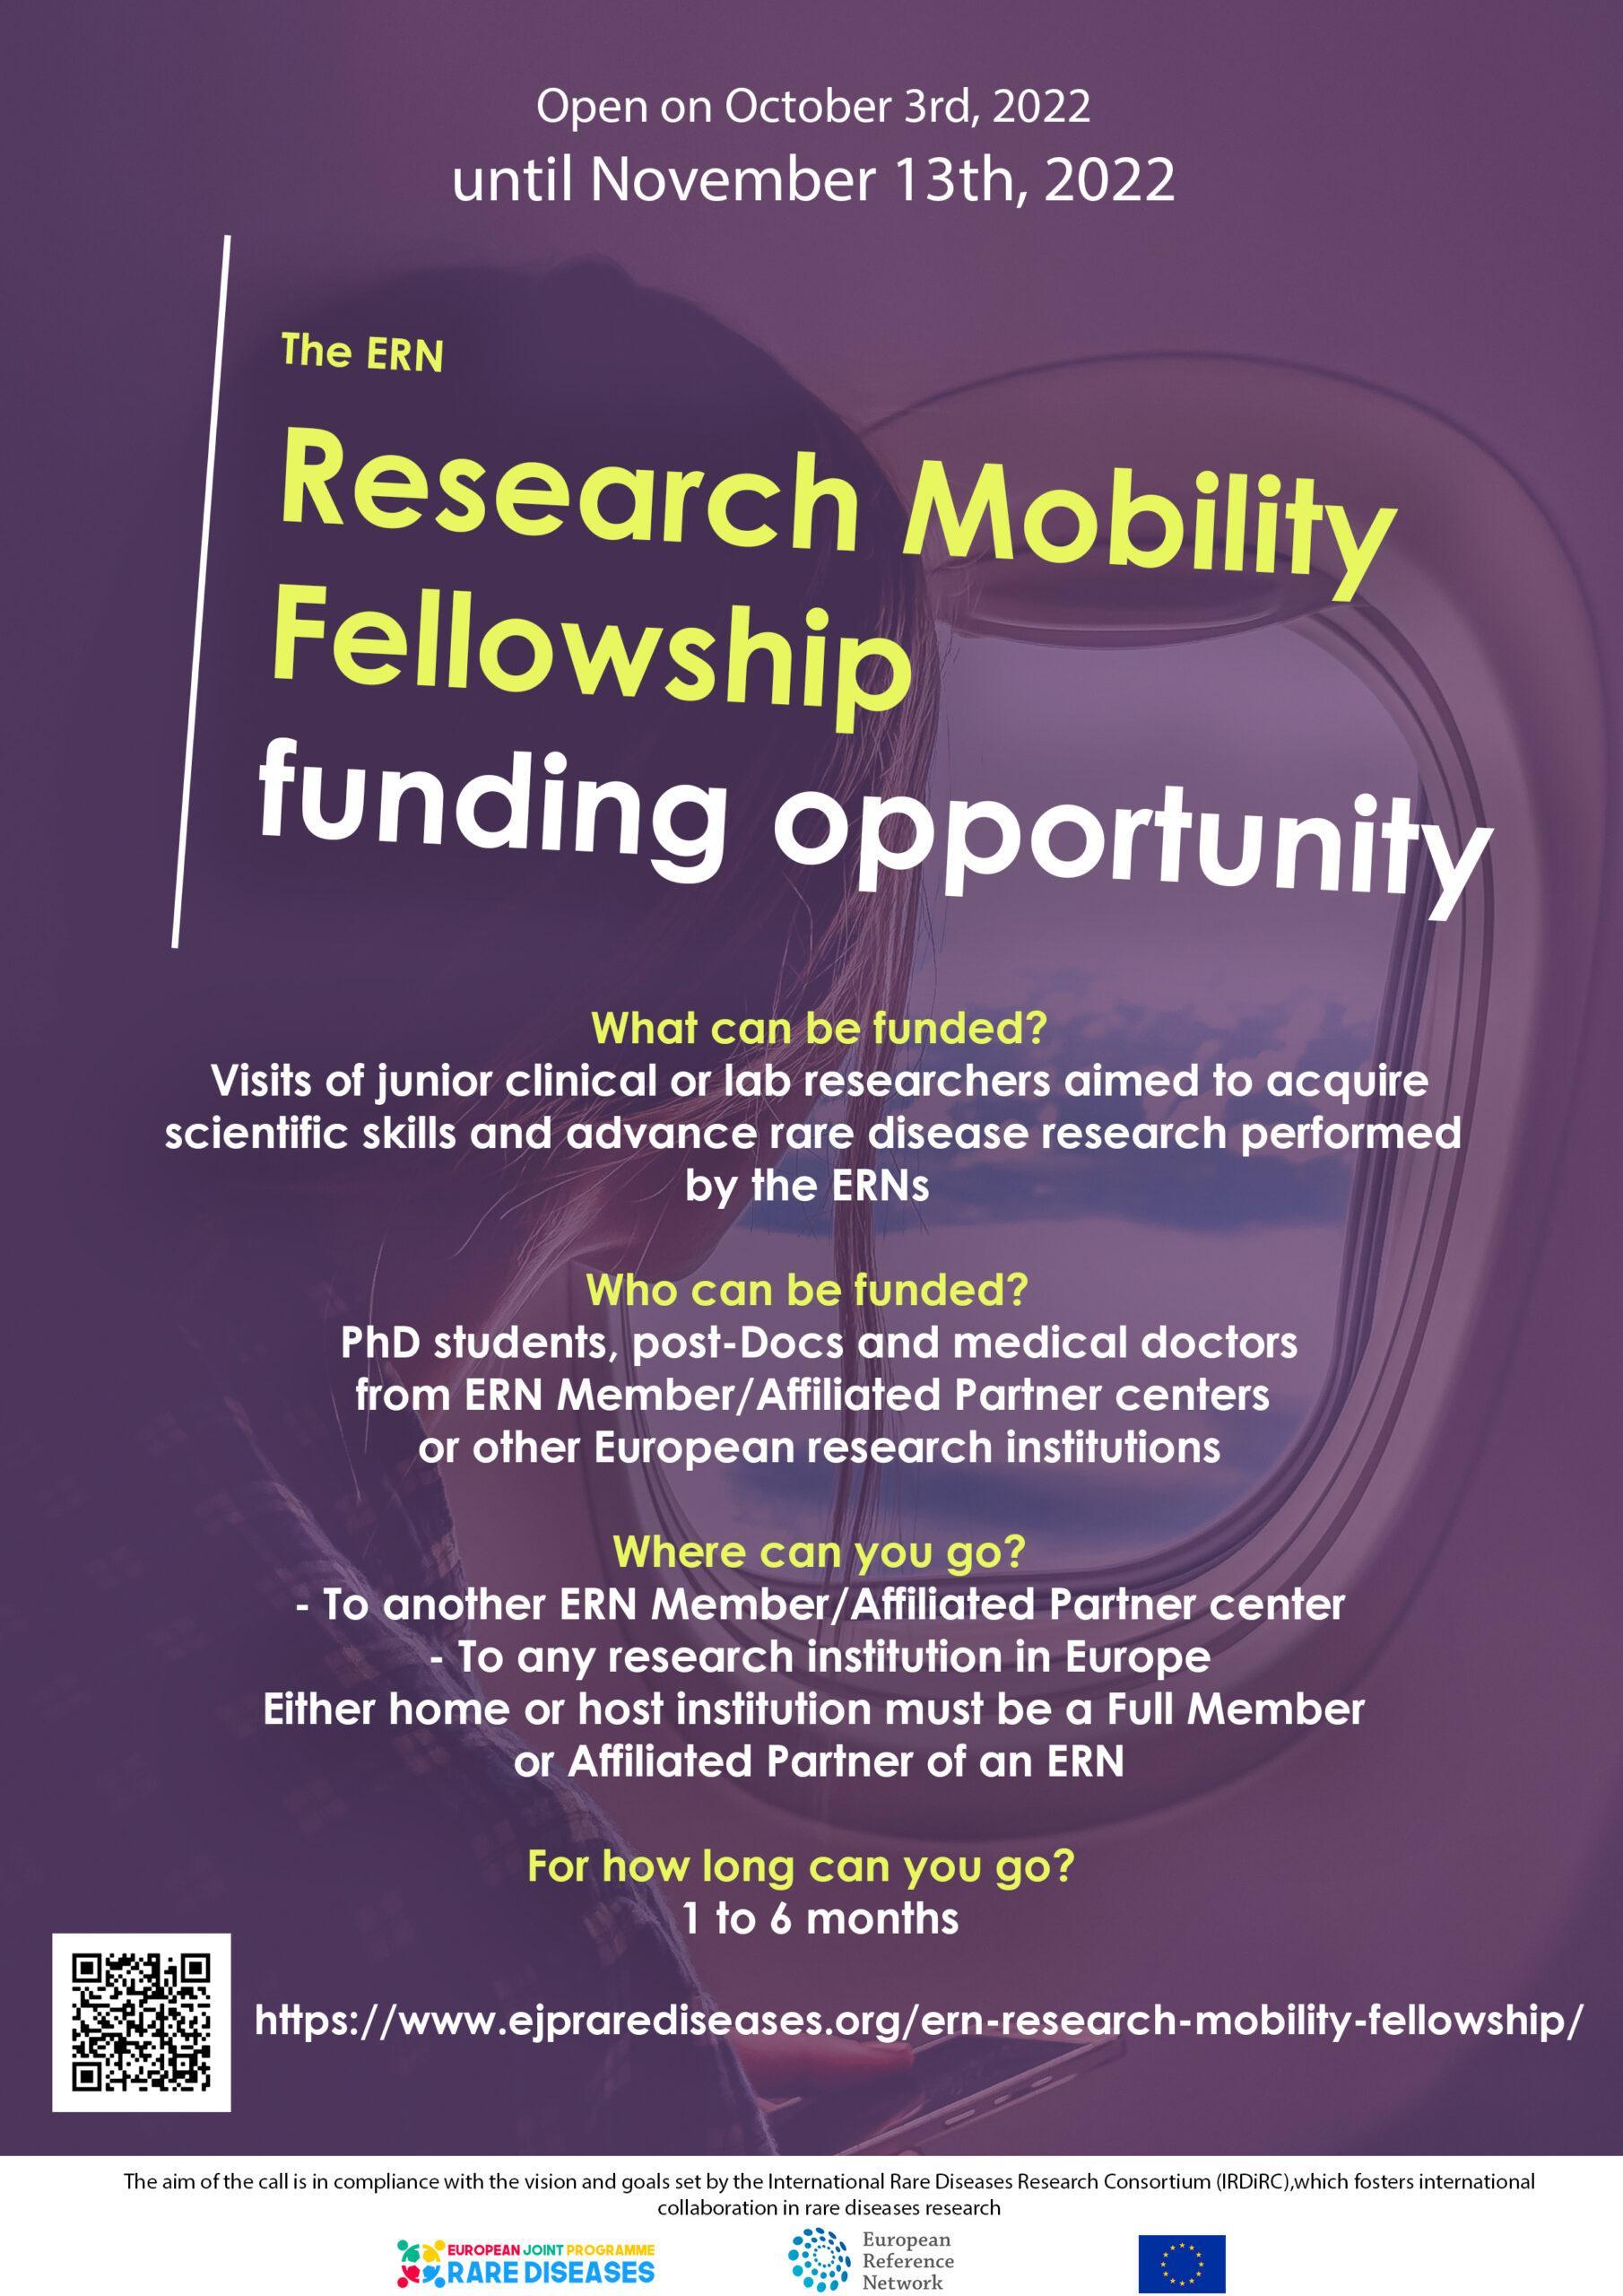 The ERN Research Mobility Fellowships call